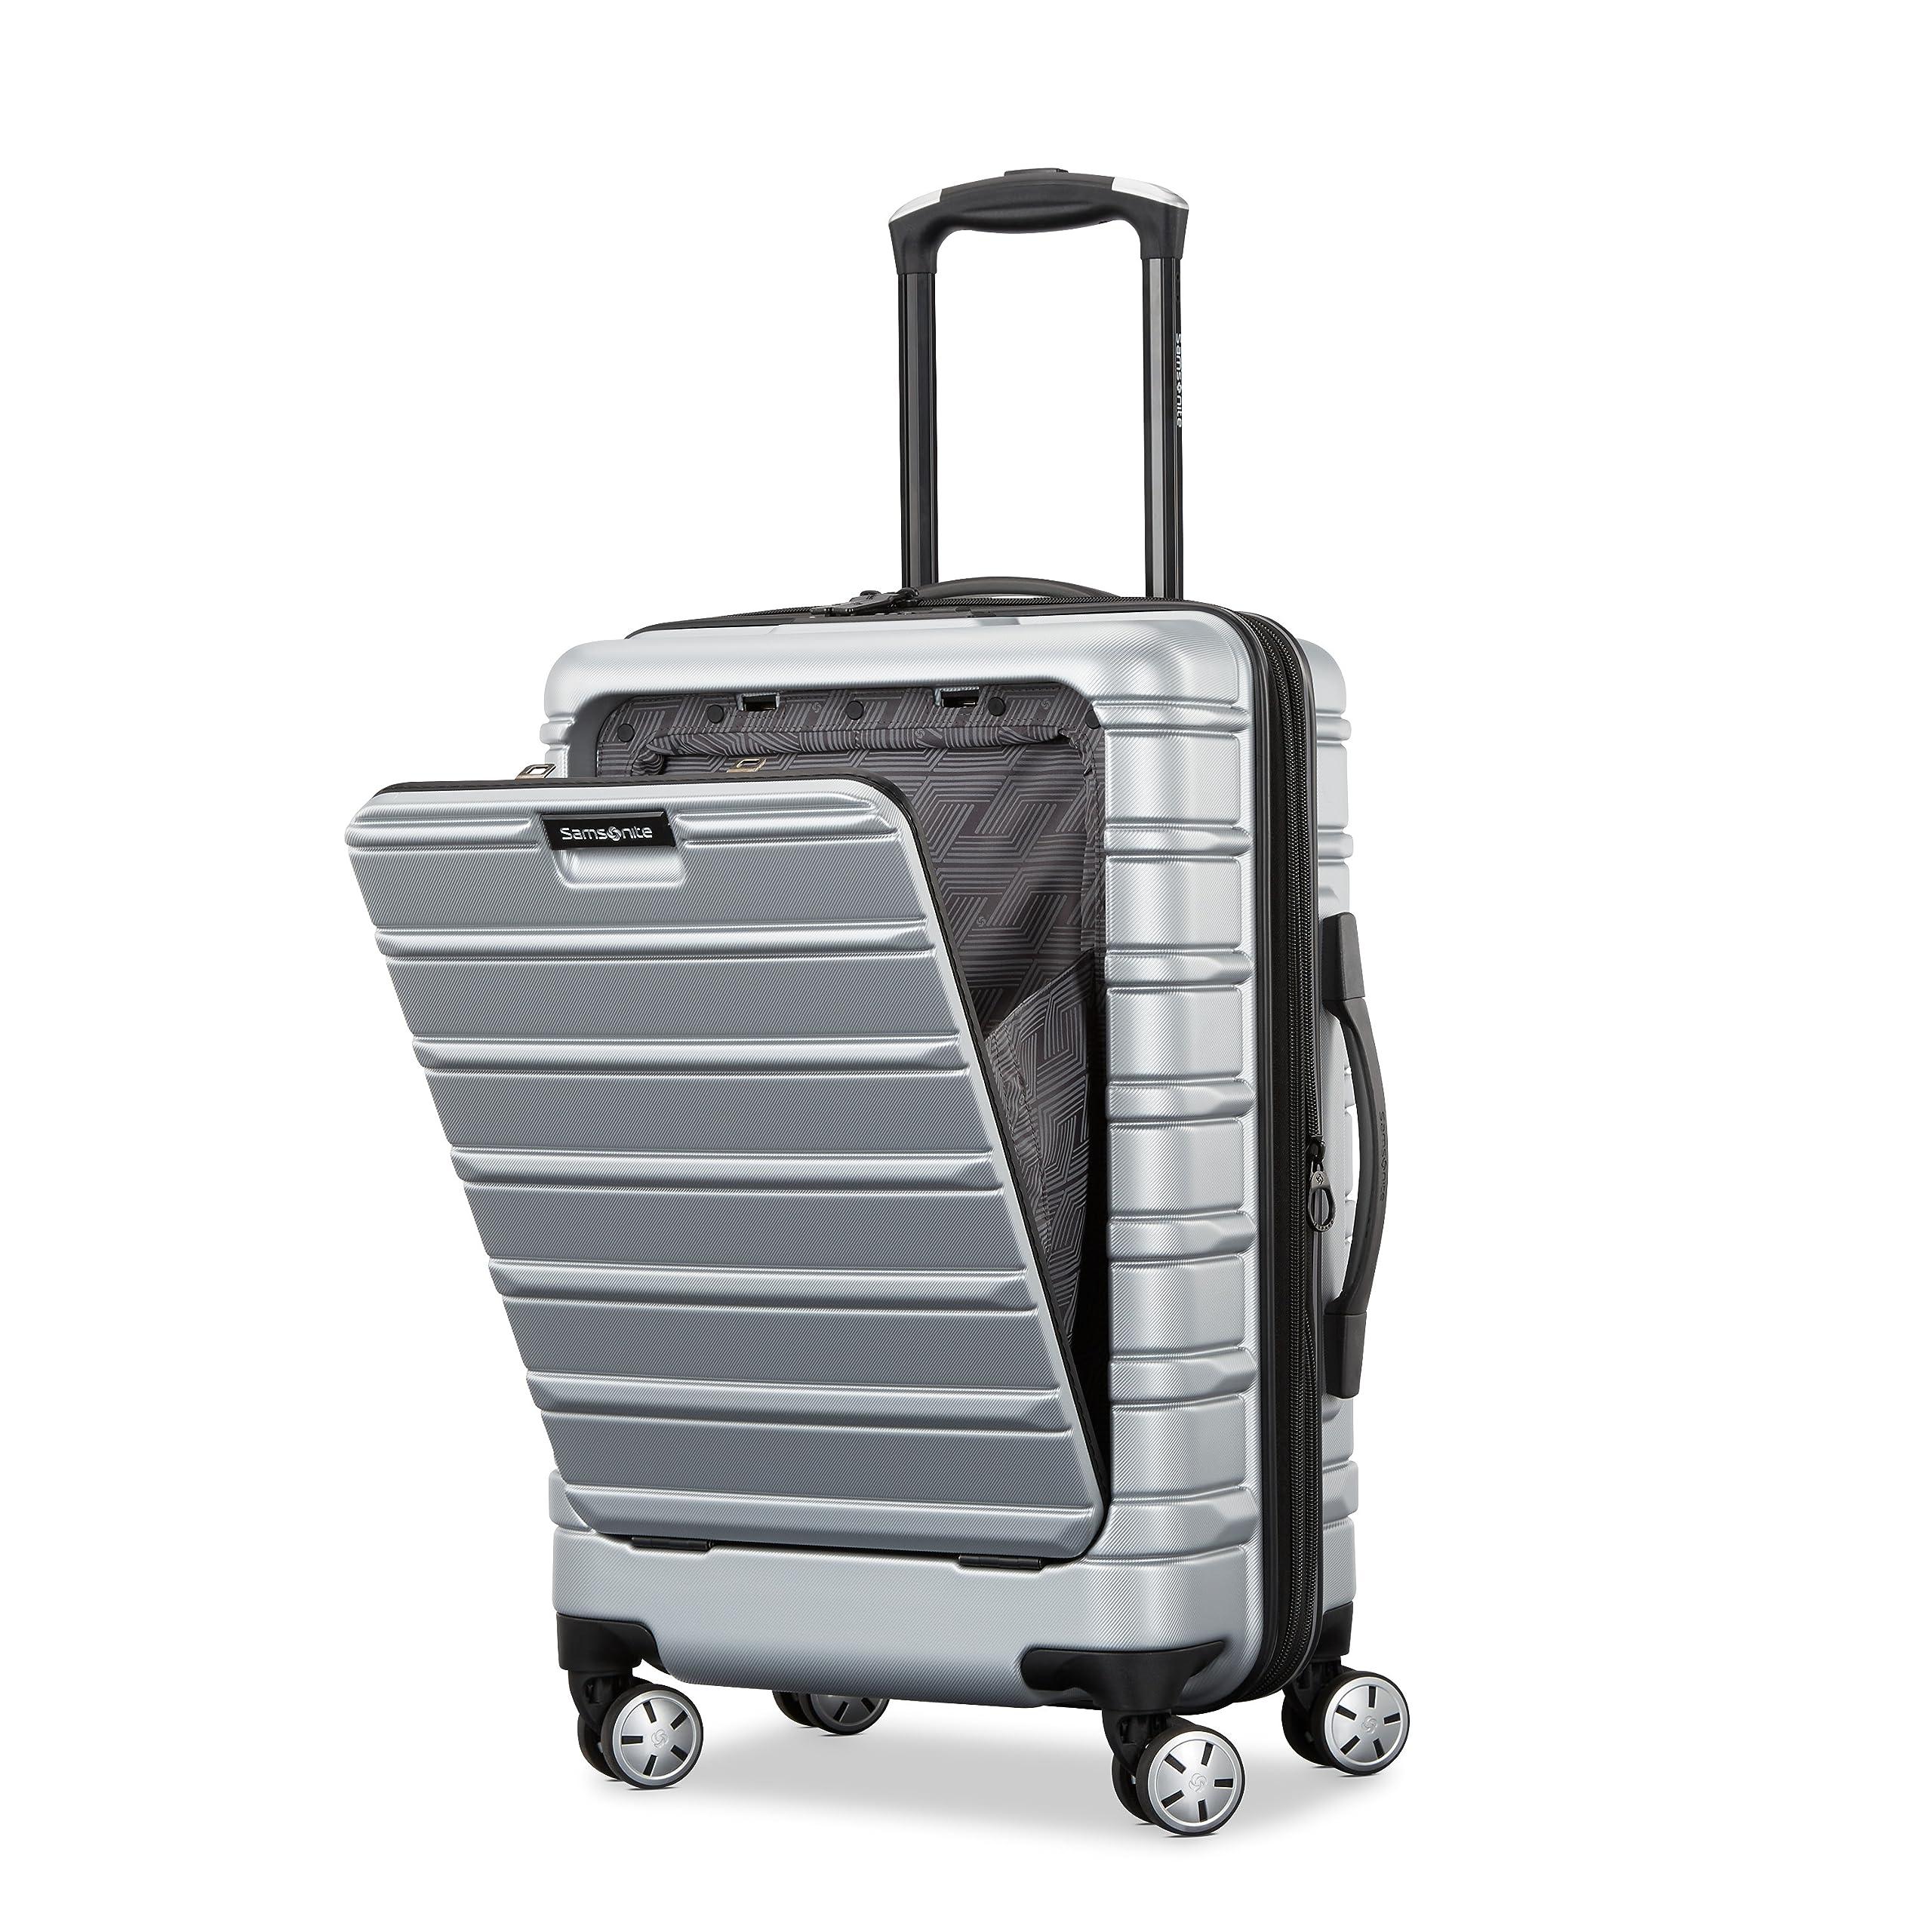 Samsonite Omni 2 Hardside Expandable Luggage With Spinners in Metallic ...